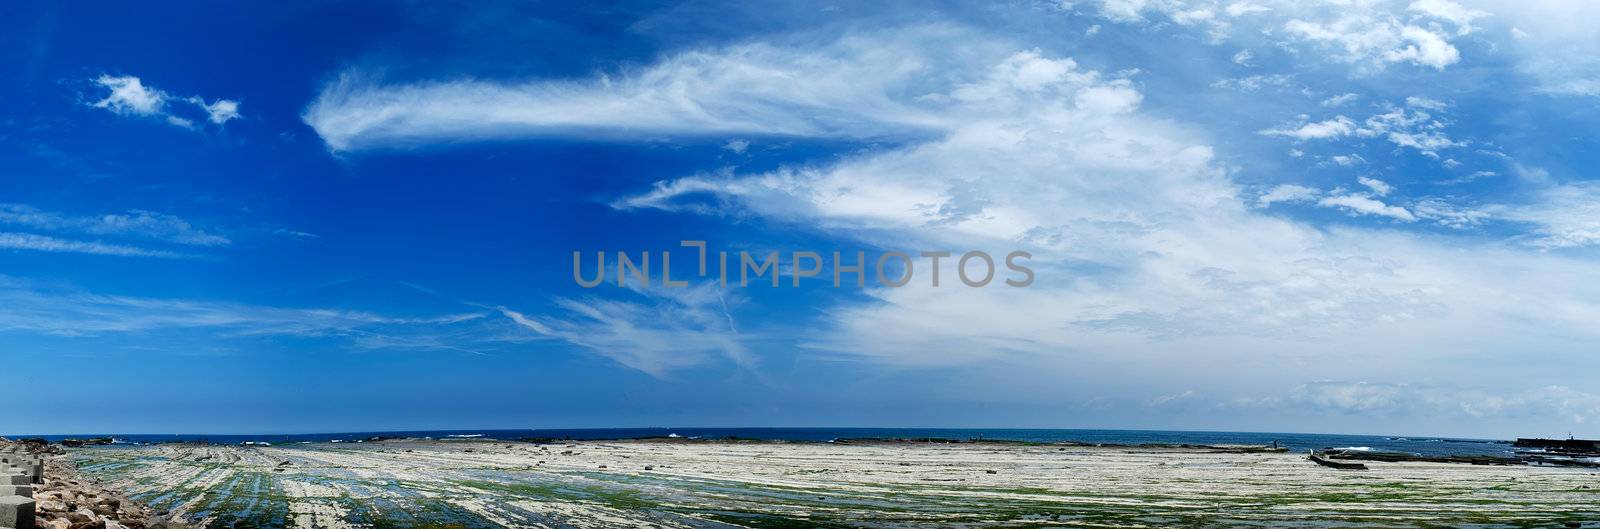 It is a beautiful panorama blue sky and beach.